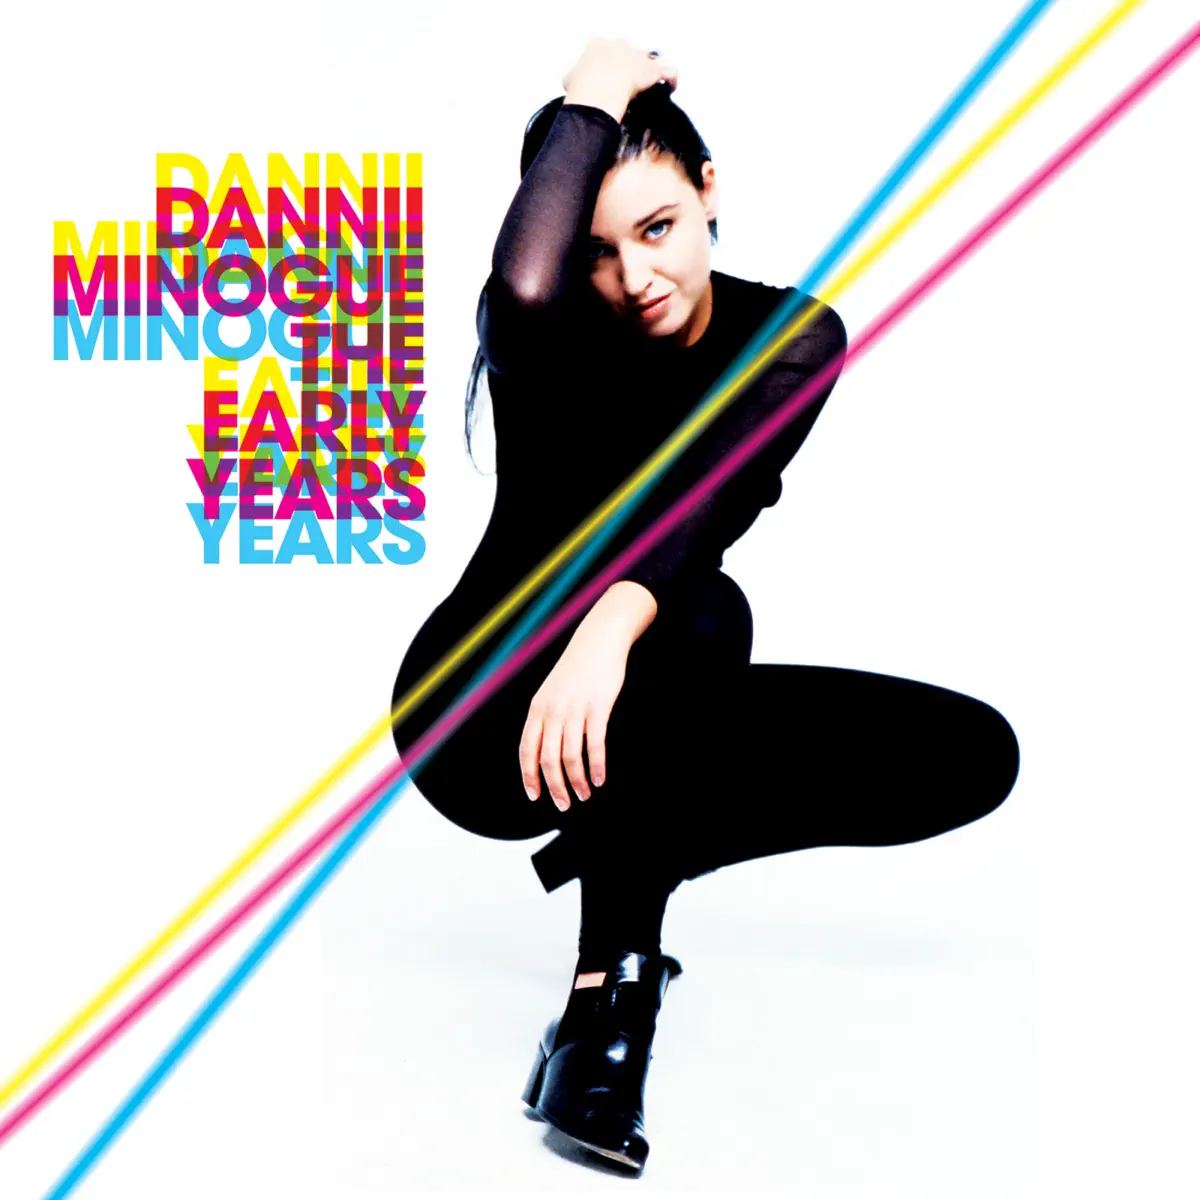 Dannii Minogue - Dannii Minogue: The Early Years (2008) [iTunes Plus AAC M4A]-新房子